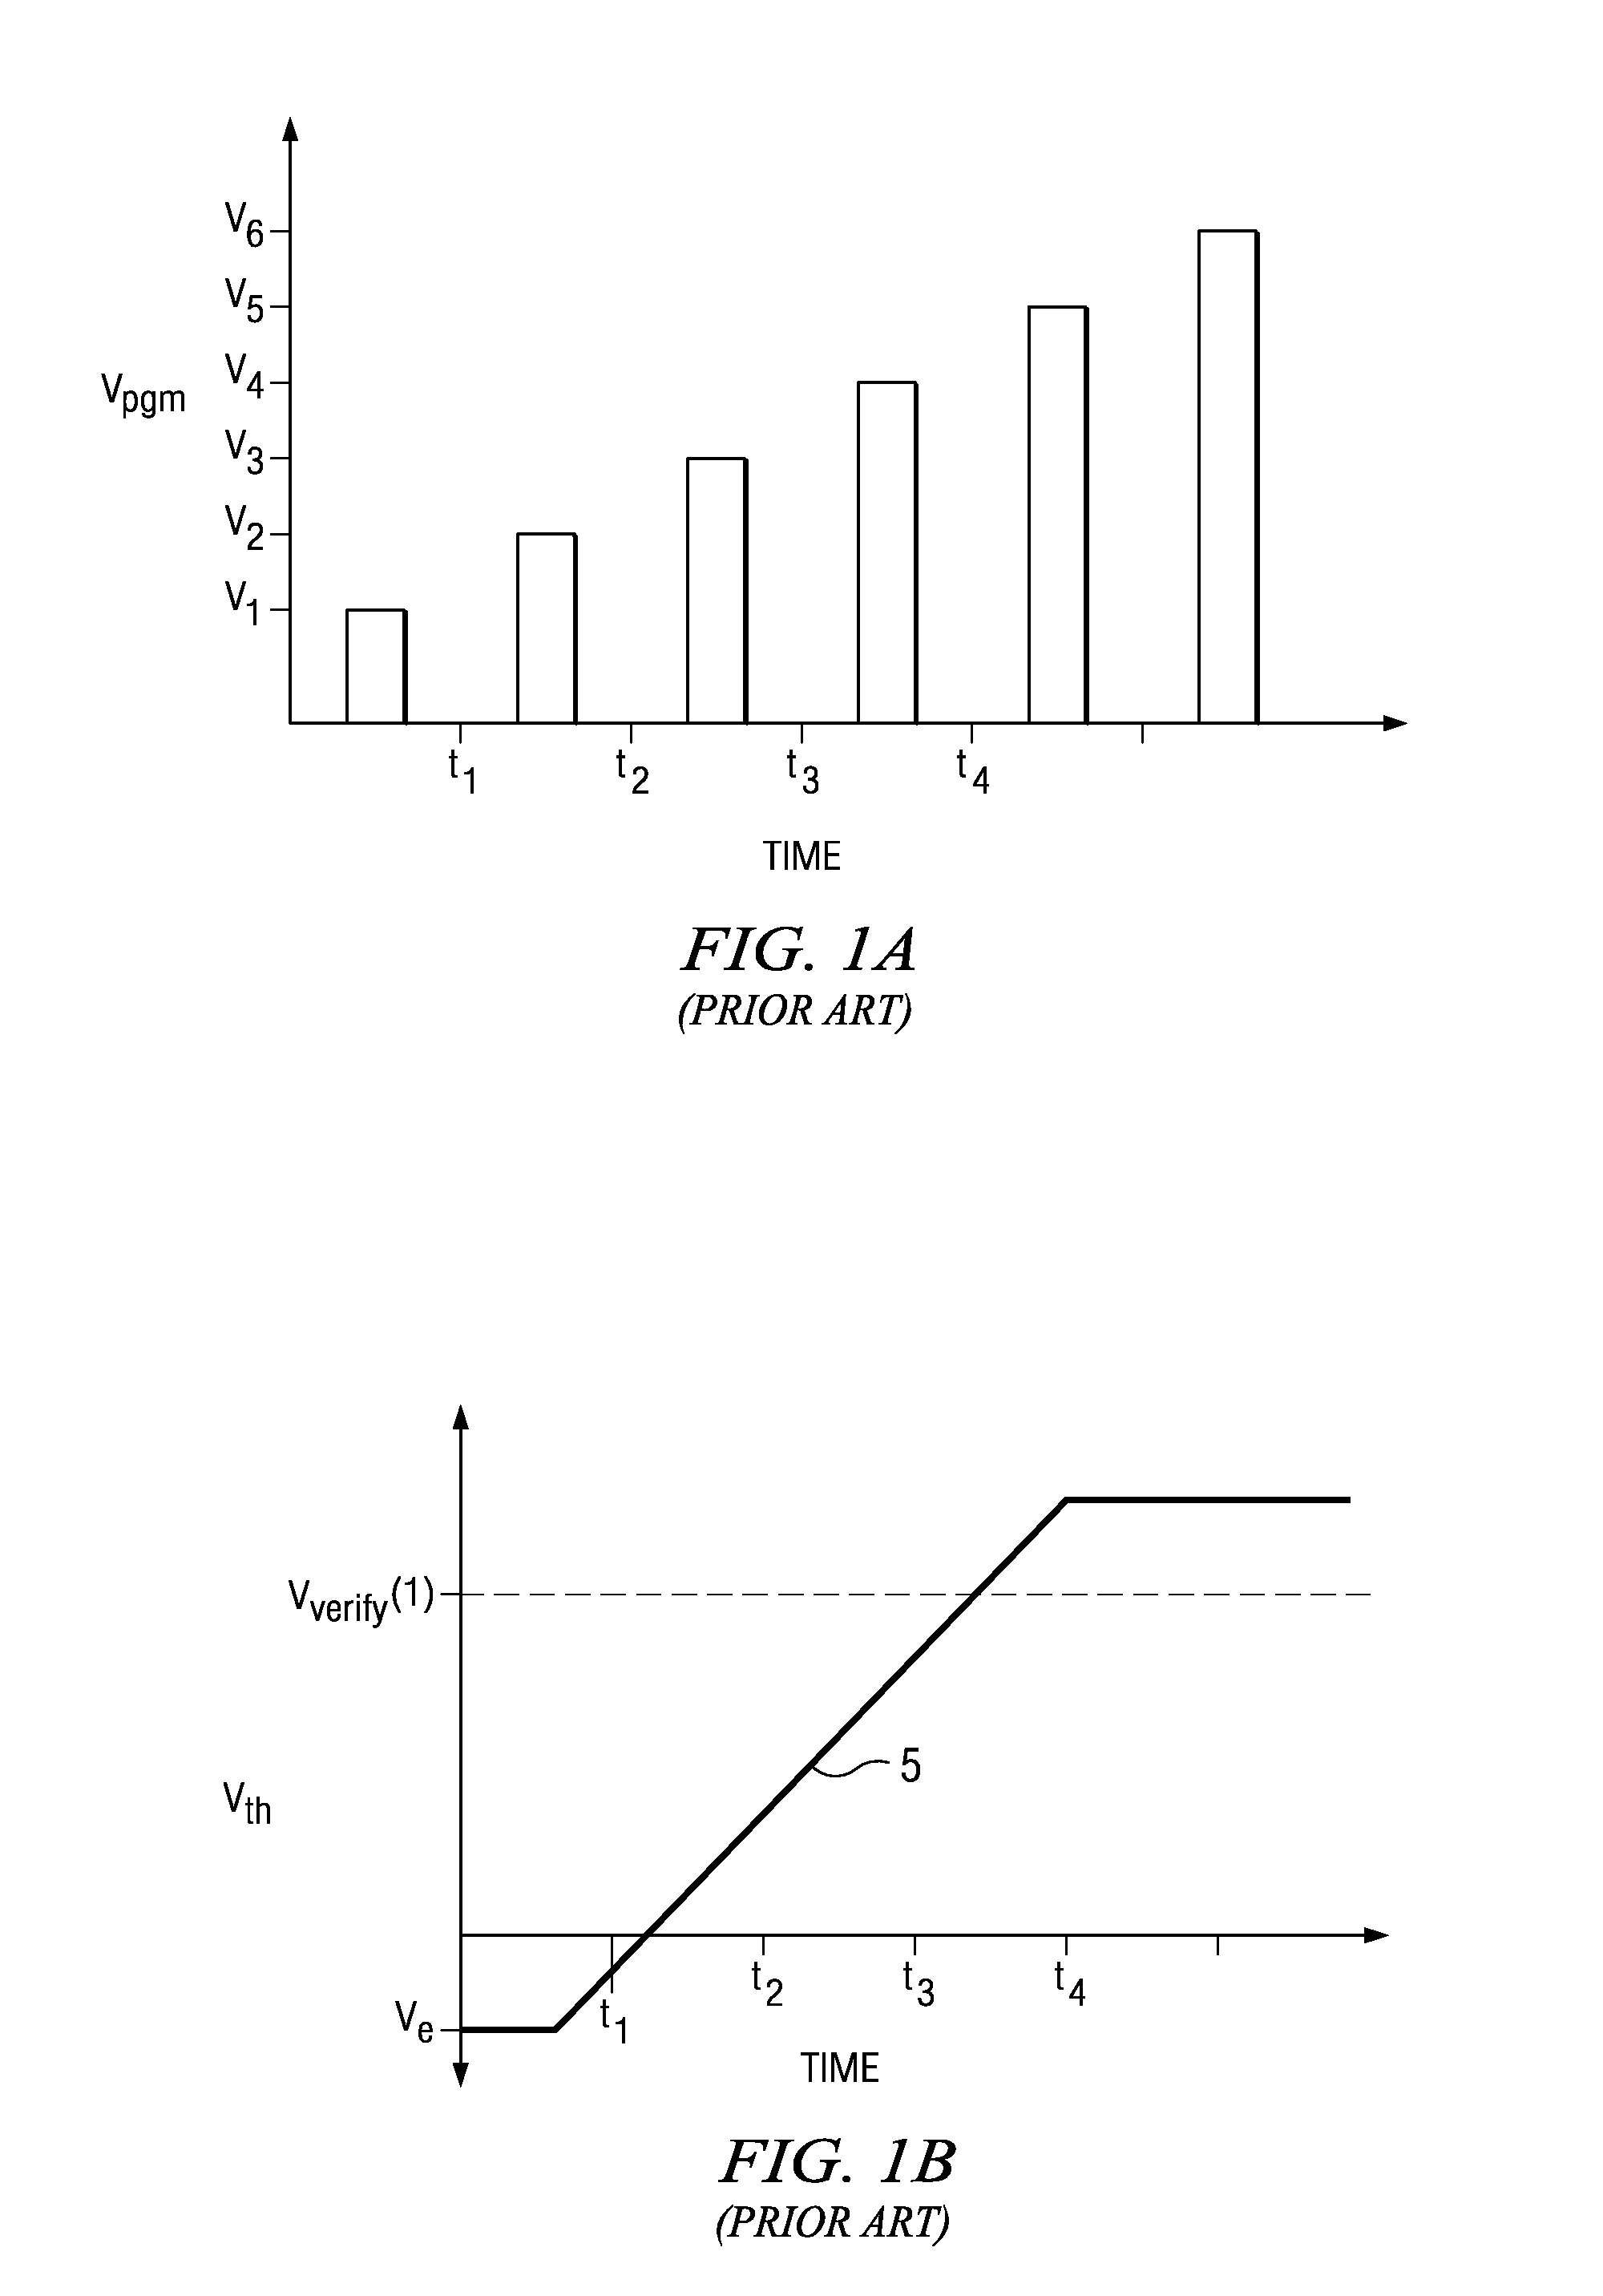 Method of partial page fail bit detection in flash memory devices